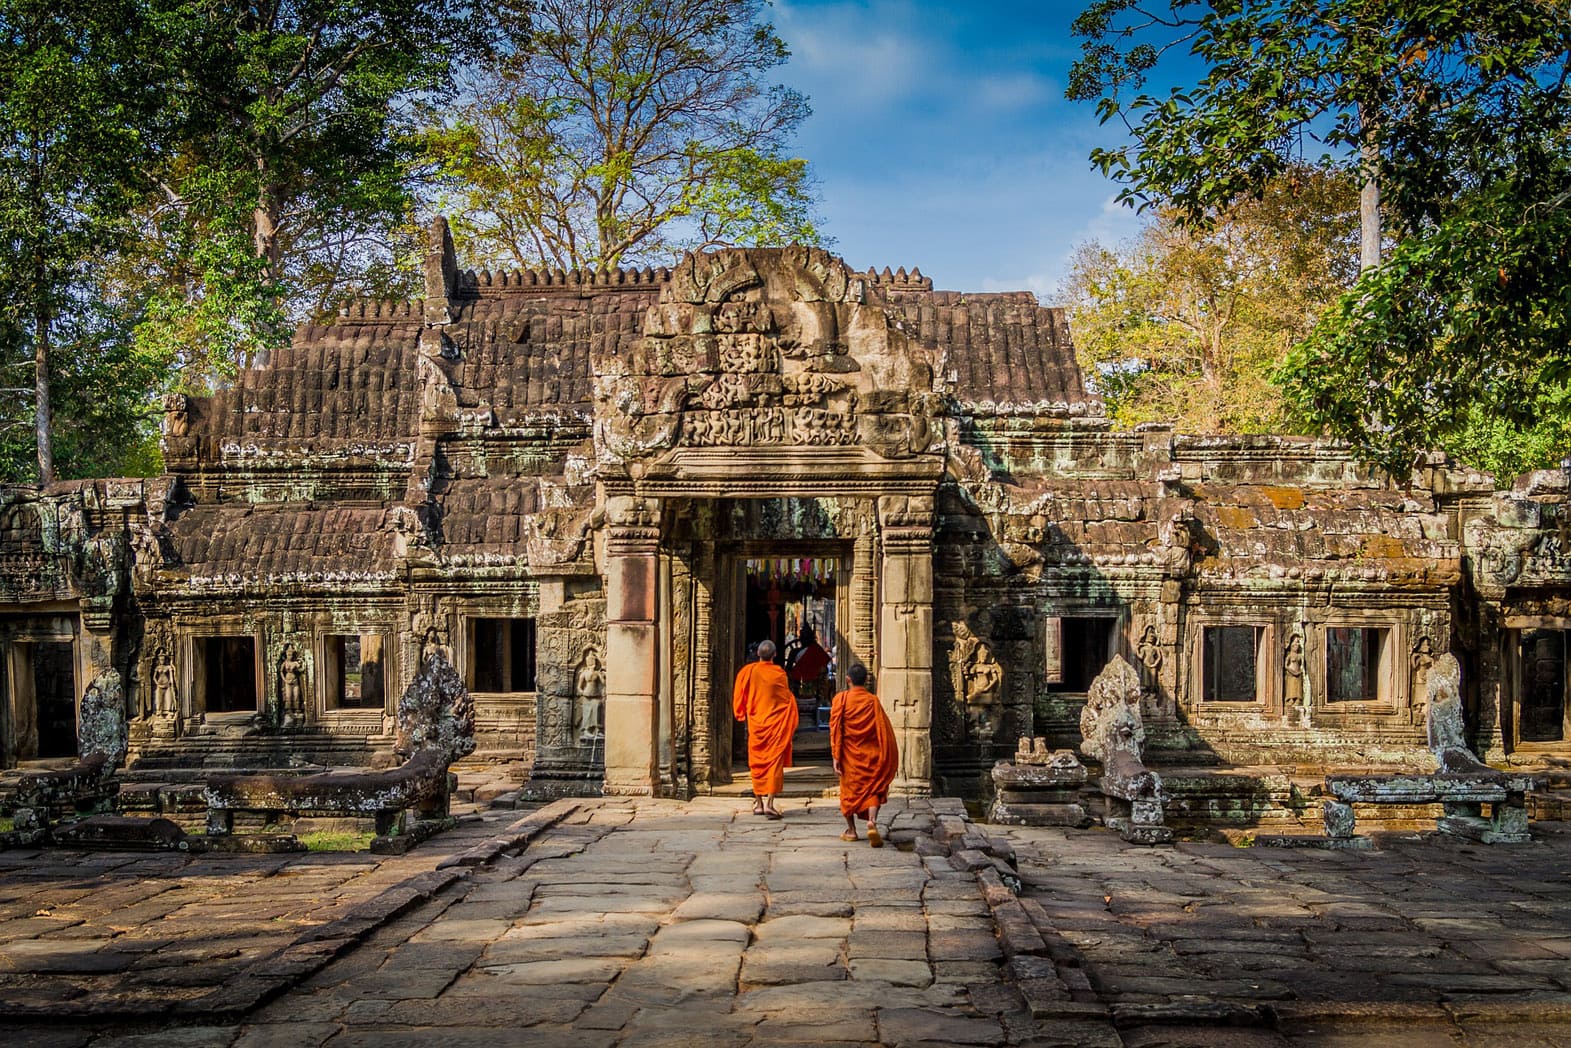 You could roam the temples around Angkor Wat for a week and still not see i...